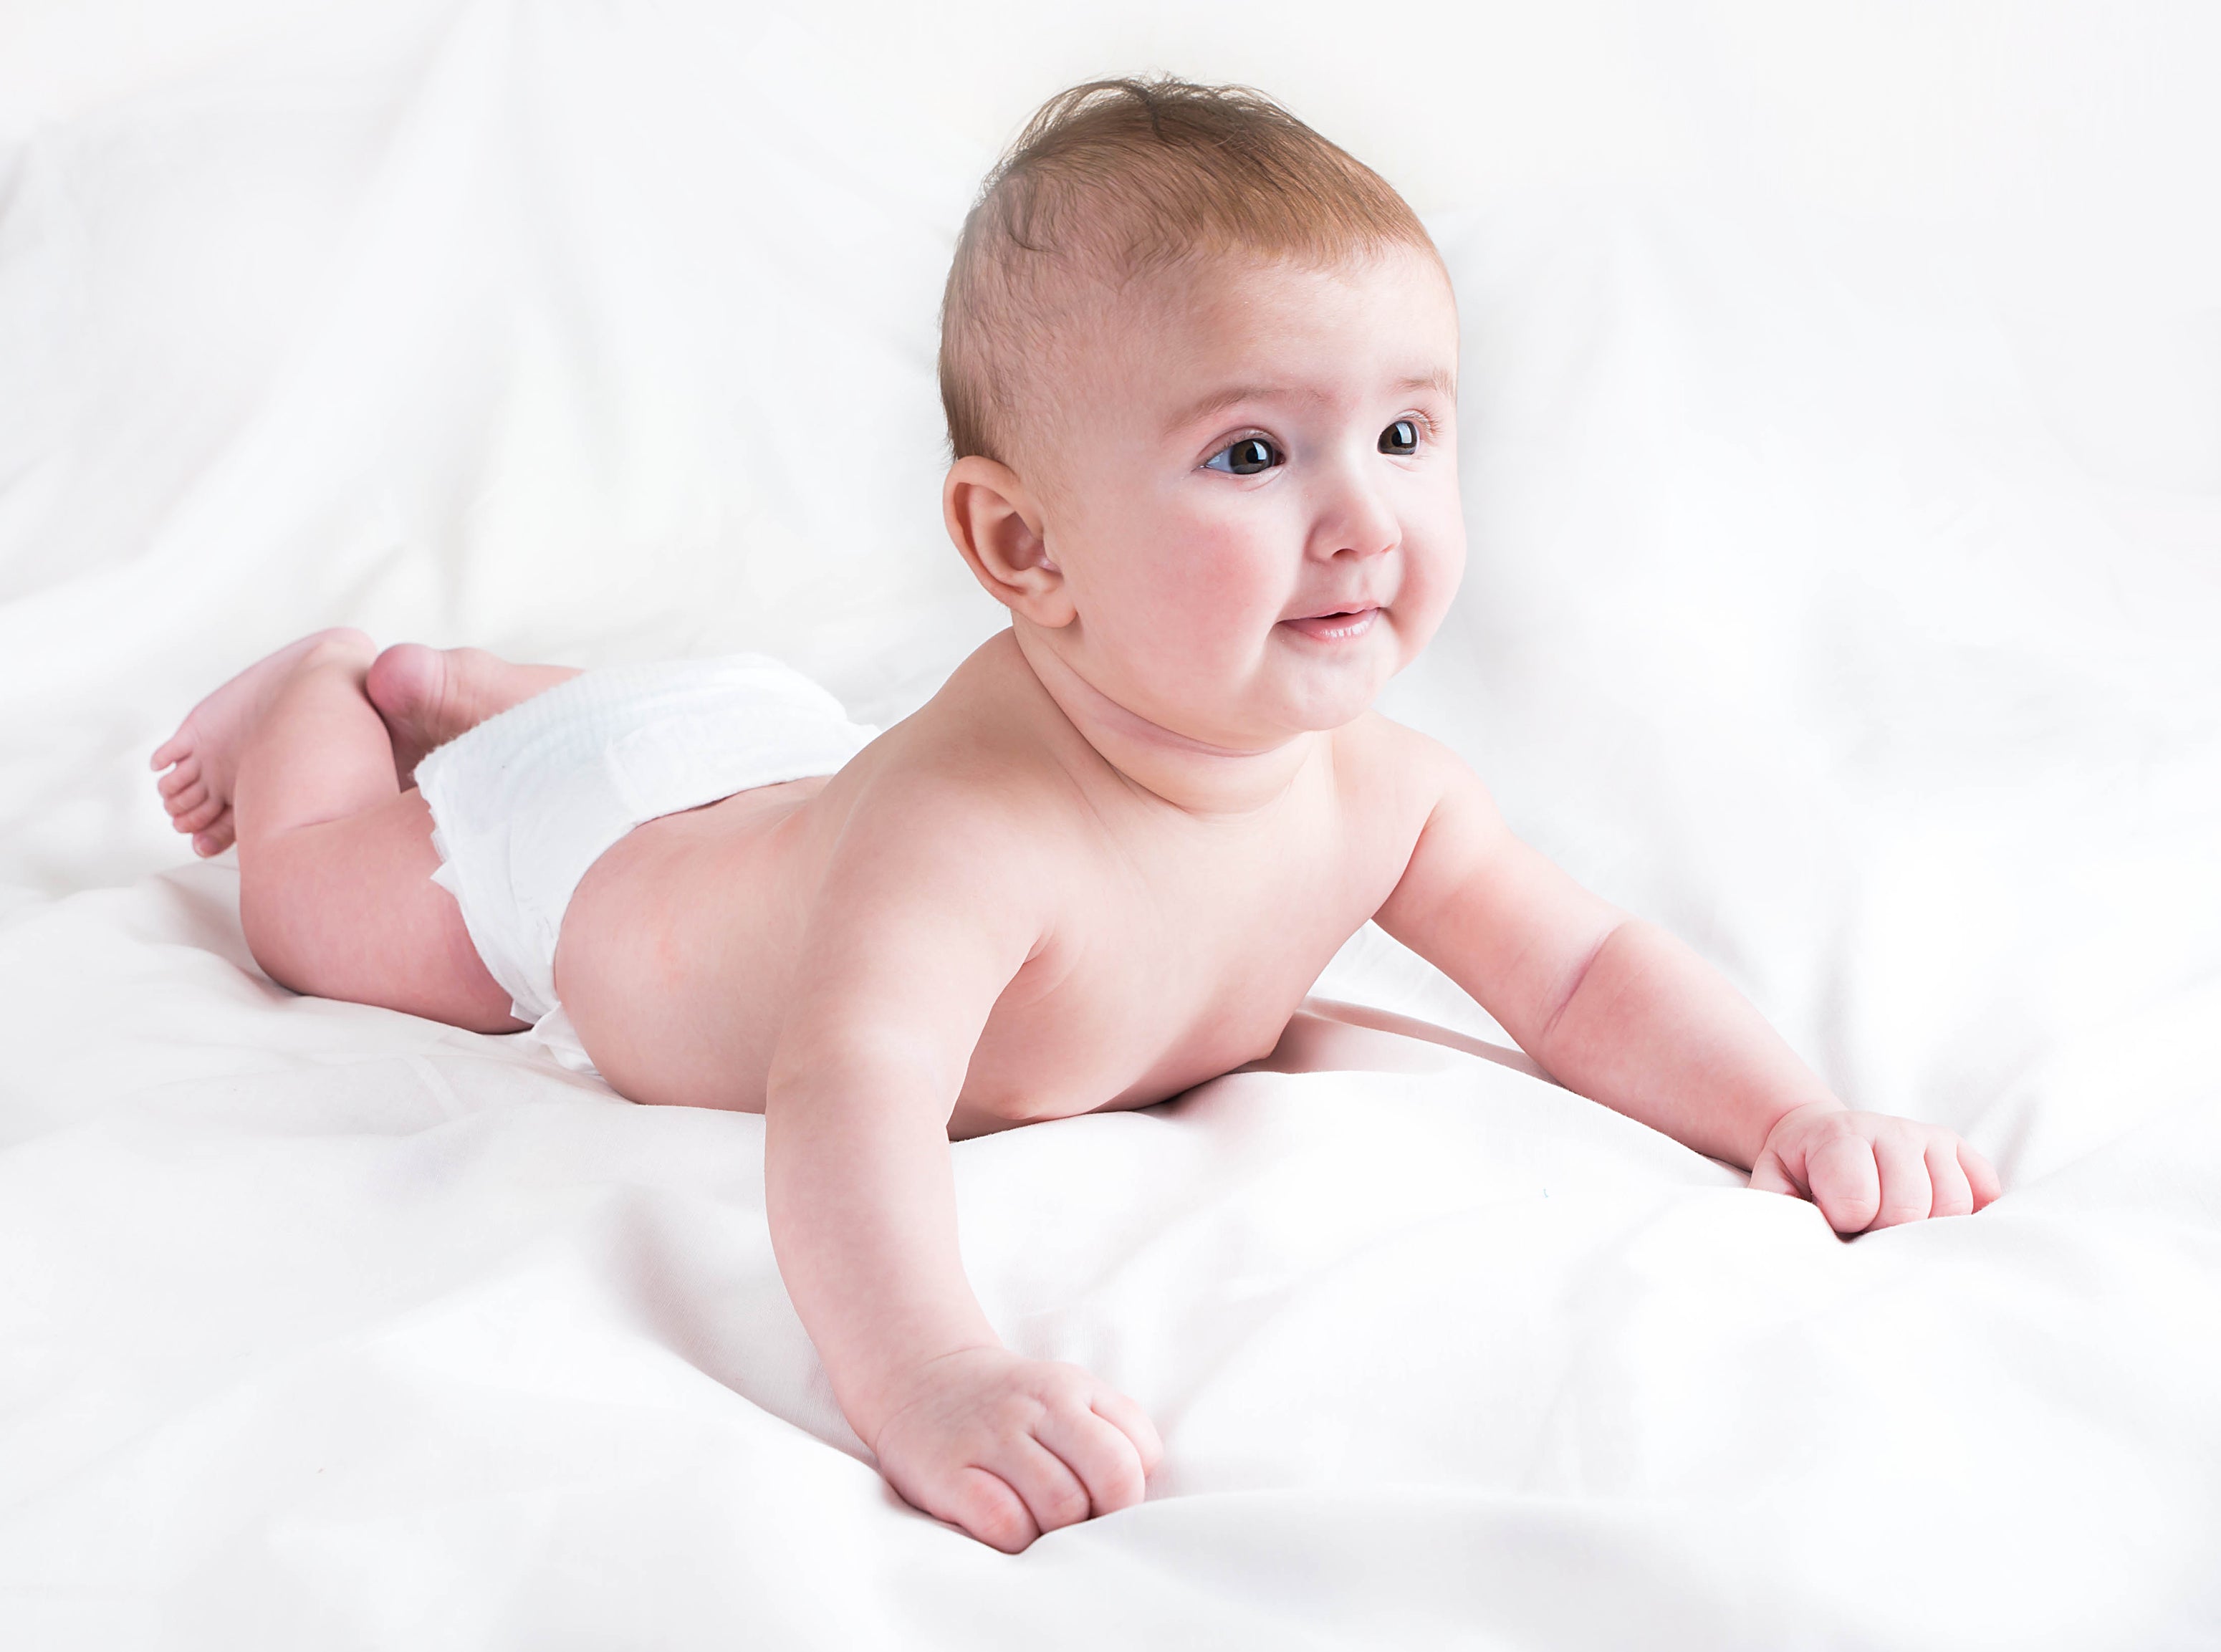 A baby, seen against a white background, wearing just a nappy at home during summers to stay cool and comfortable